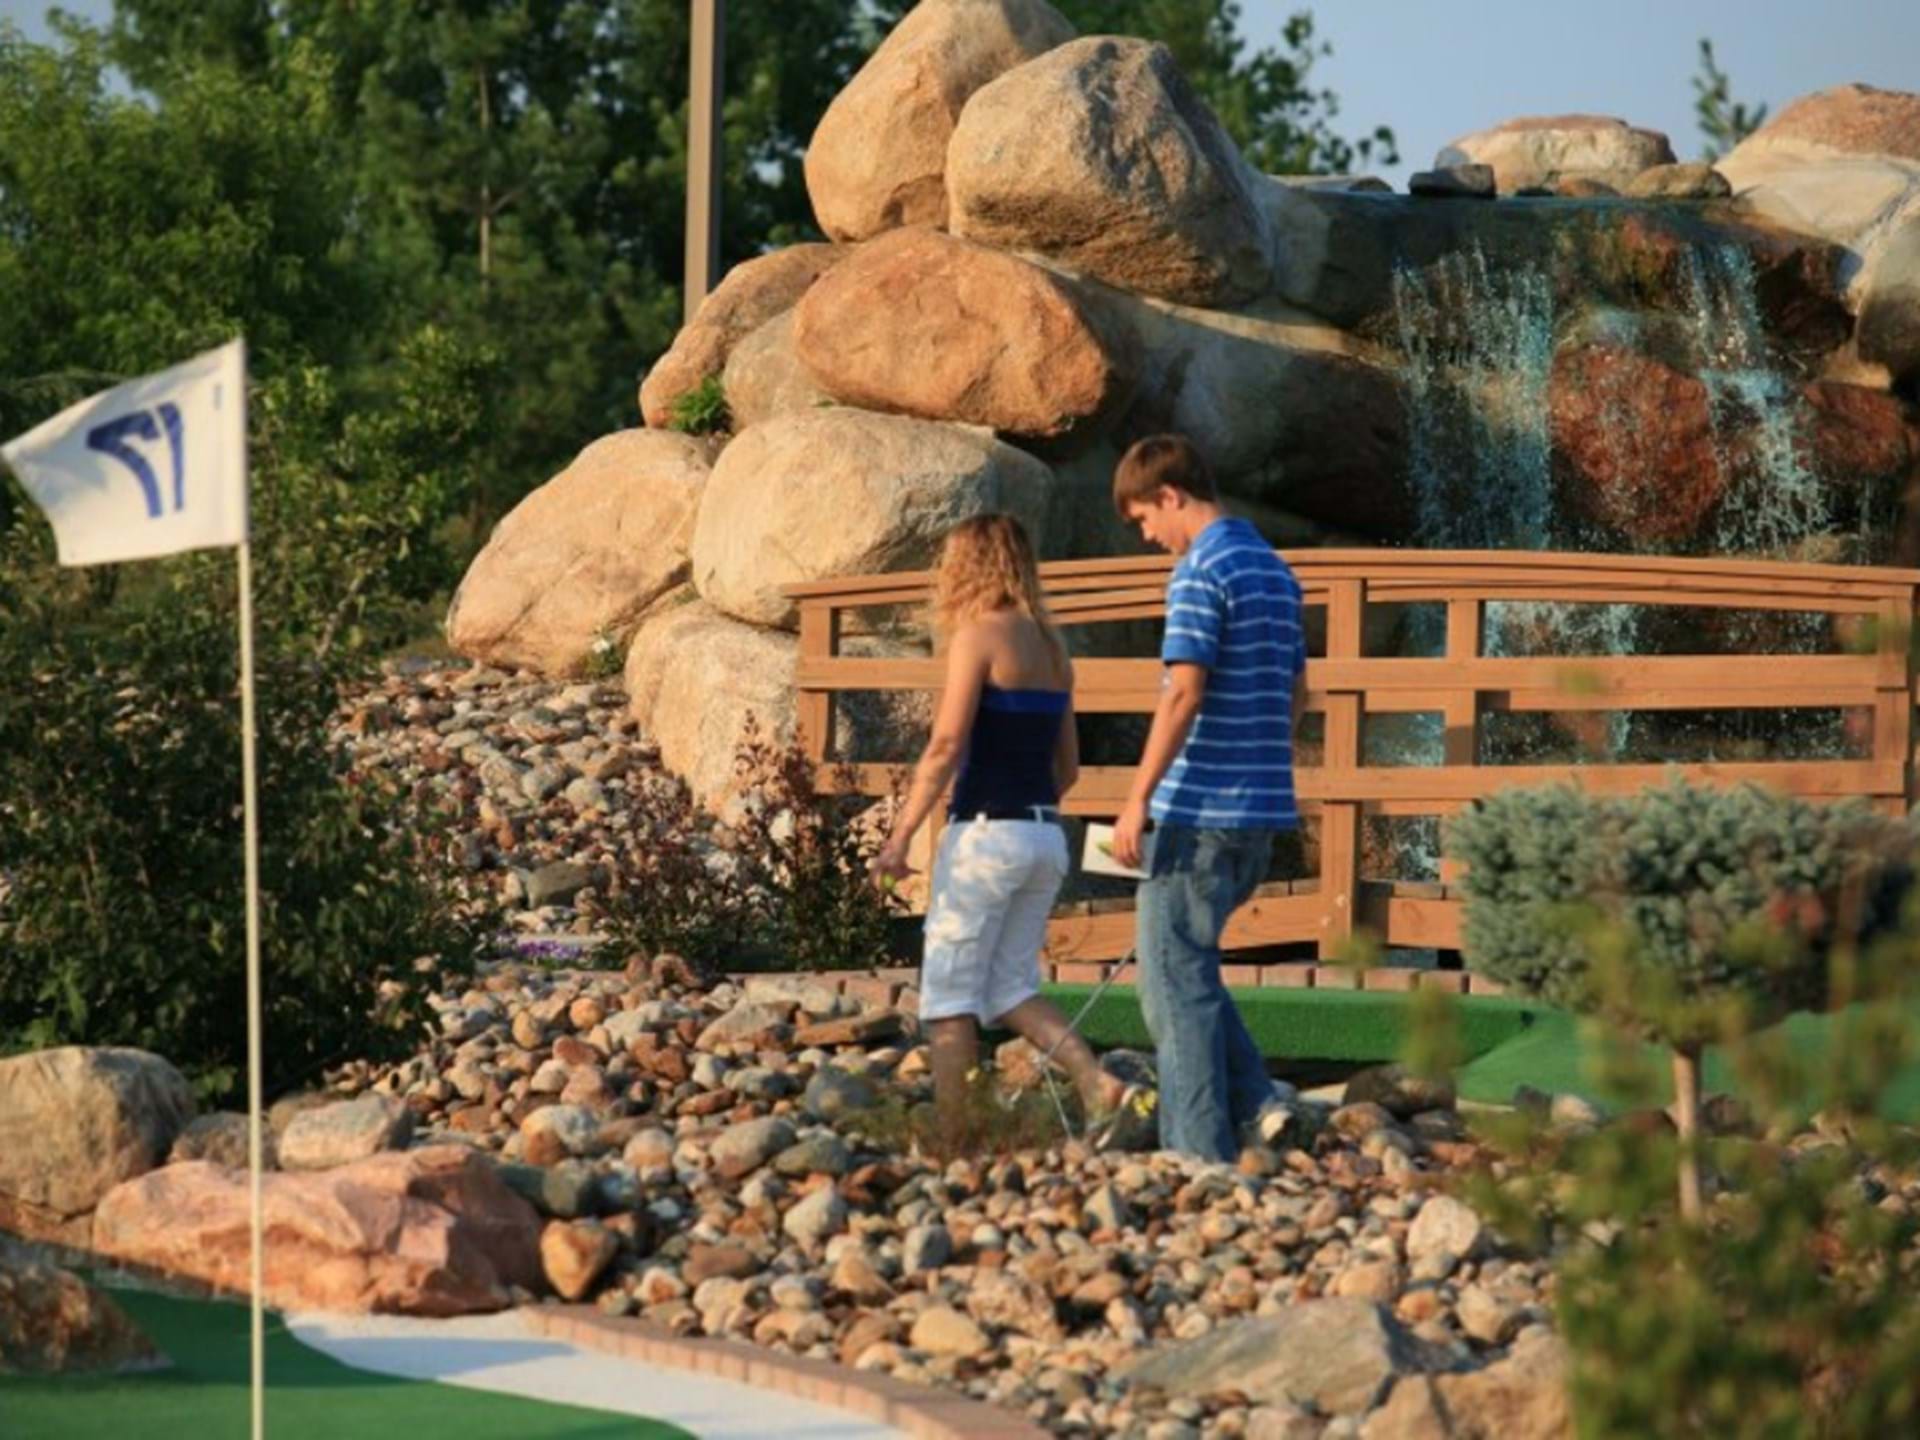 Mini golf at Toad Valley Golf Course